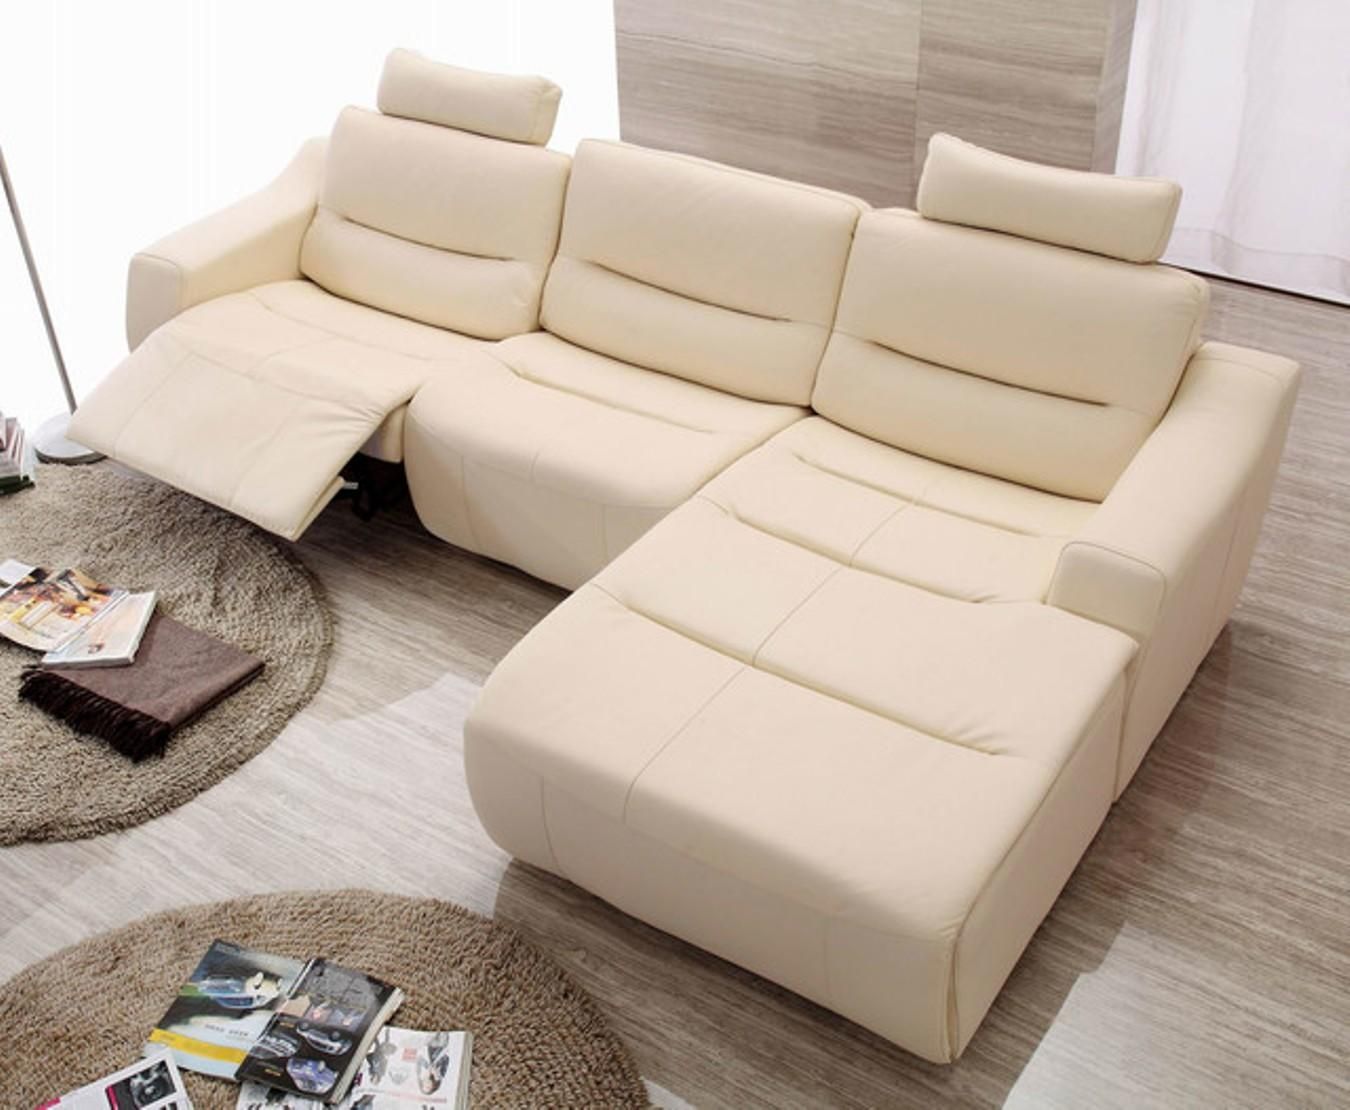 Sectional Sofas With Recliners For Small Spaces | Tehranmix Decoration Intended For Sectional Sofas For Small Spaces With Recliners (View 1 of 20)